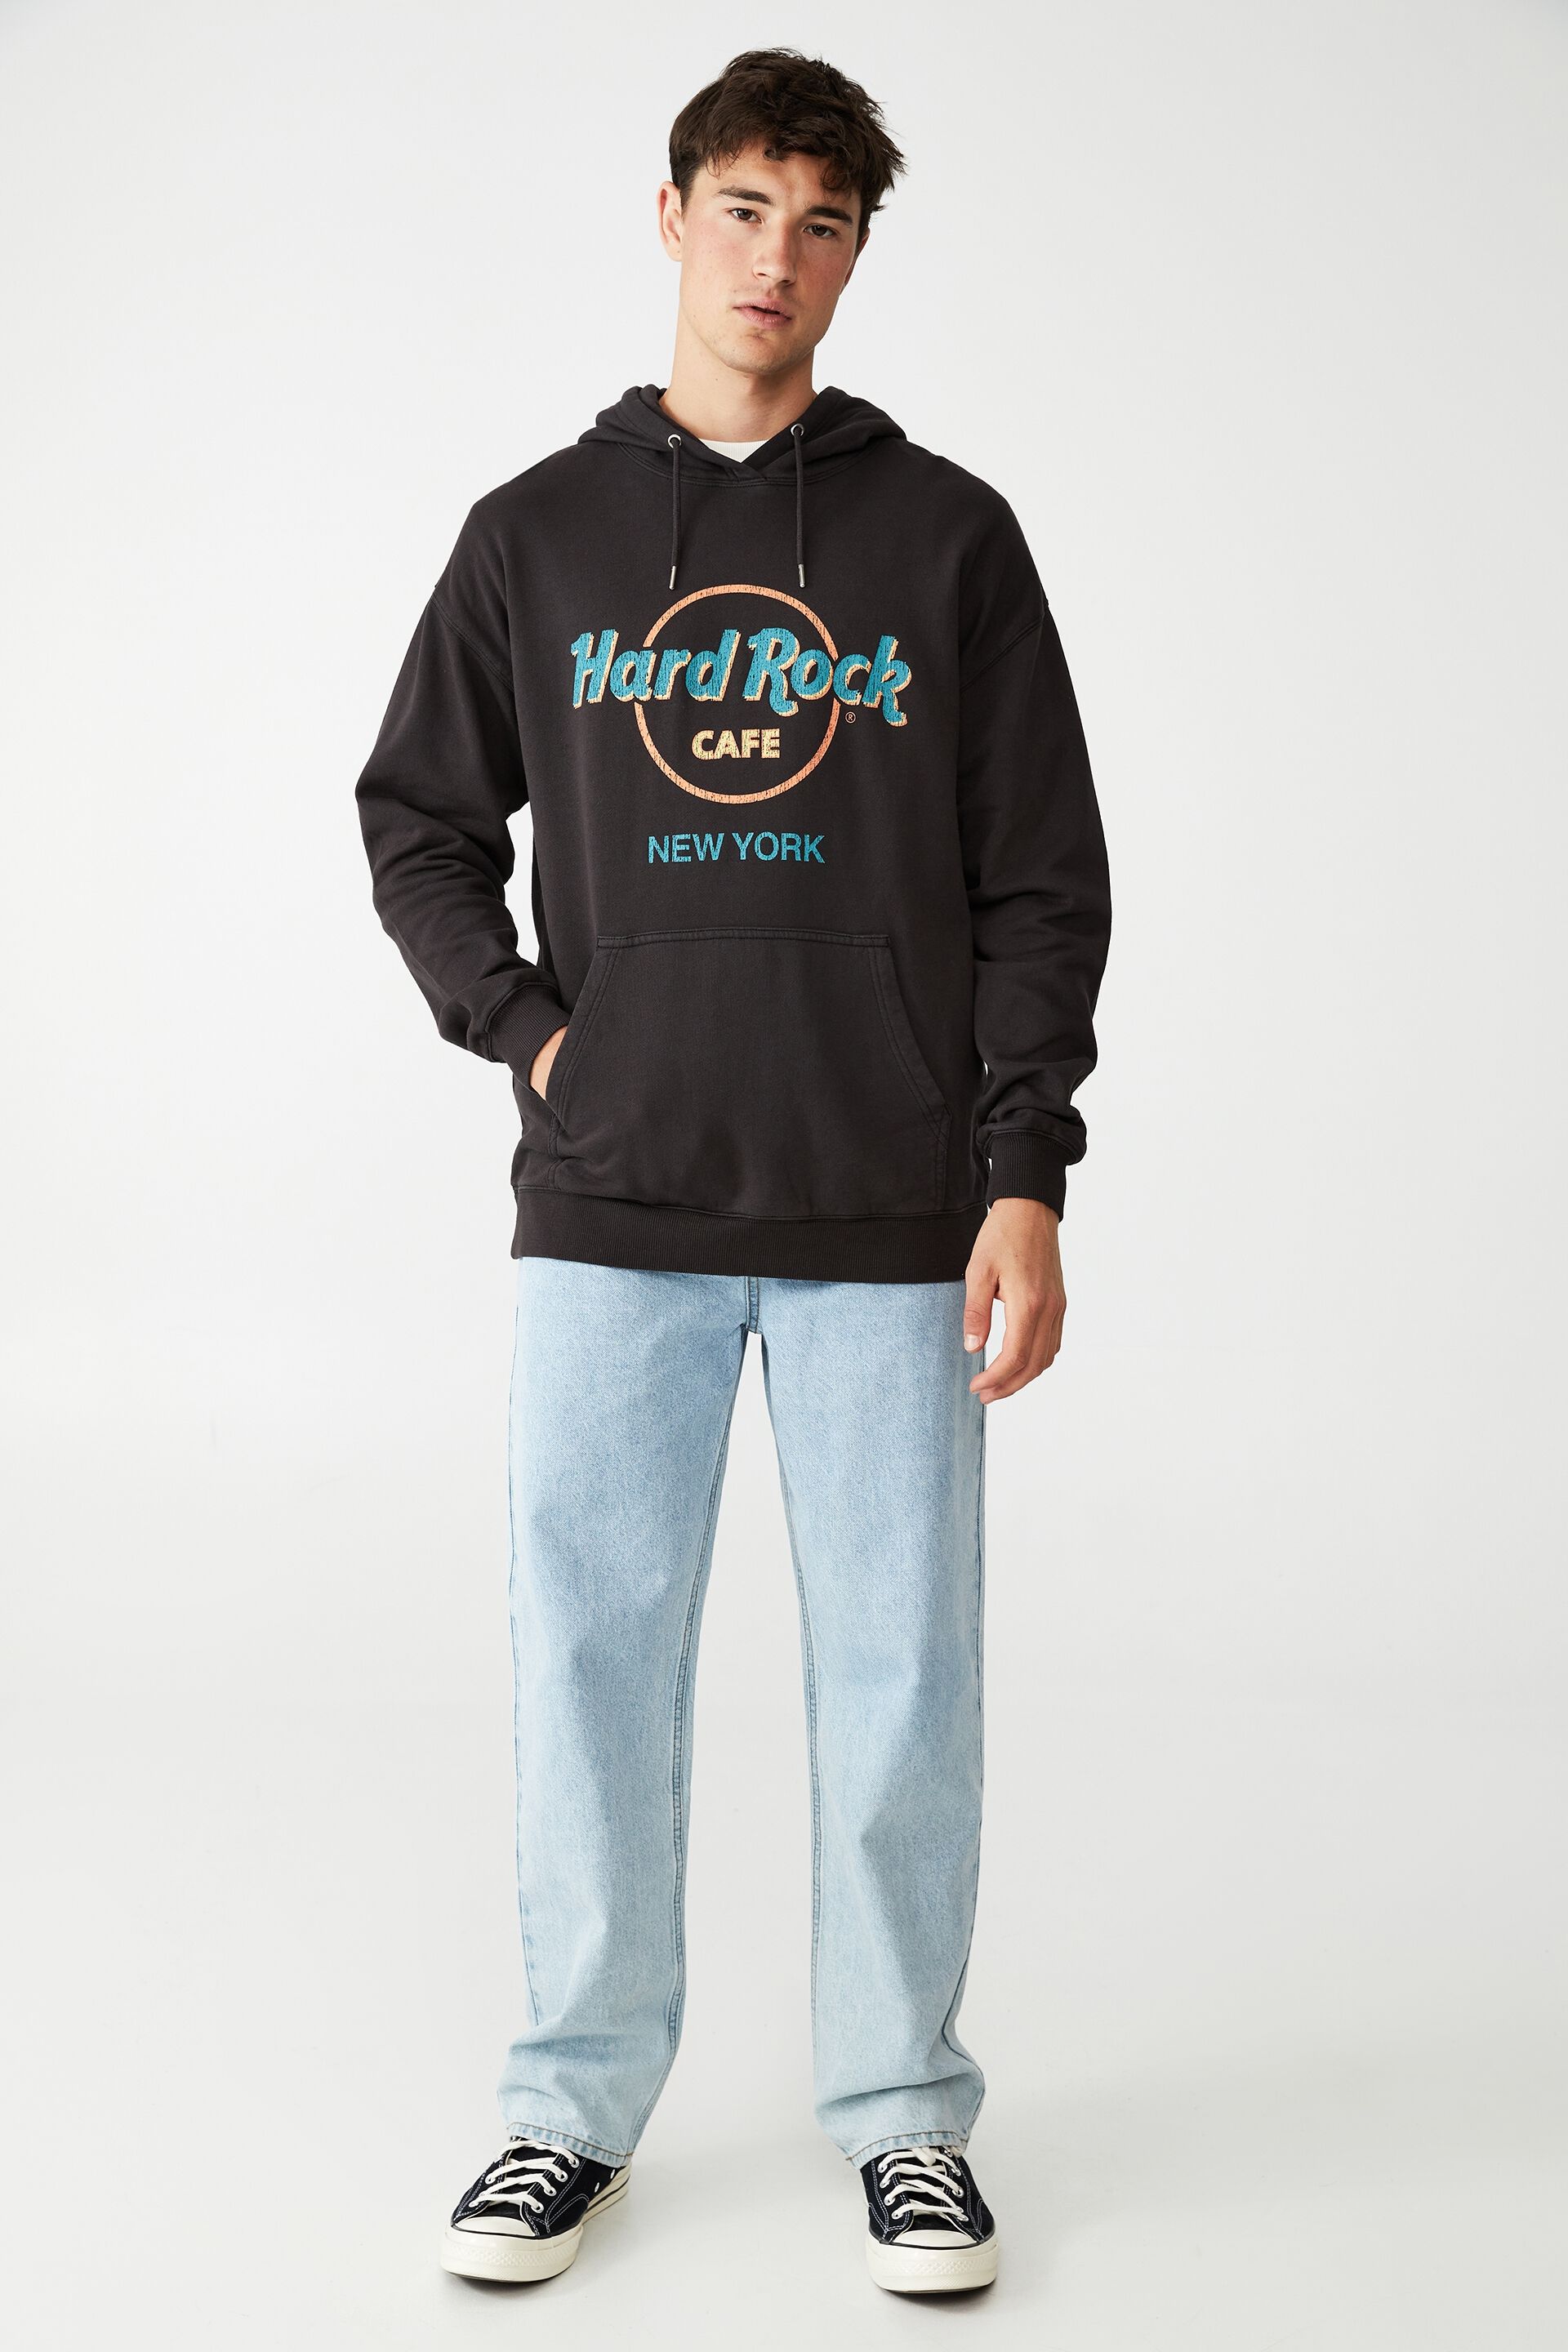 Rare Vintage HARD ROCK Cafe New York All Is One Crewneck Long Sleeve Sweatshirt Pull Over Jumper Men Clothing Hotel And Casino Medium Fit